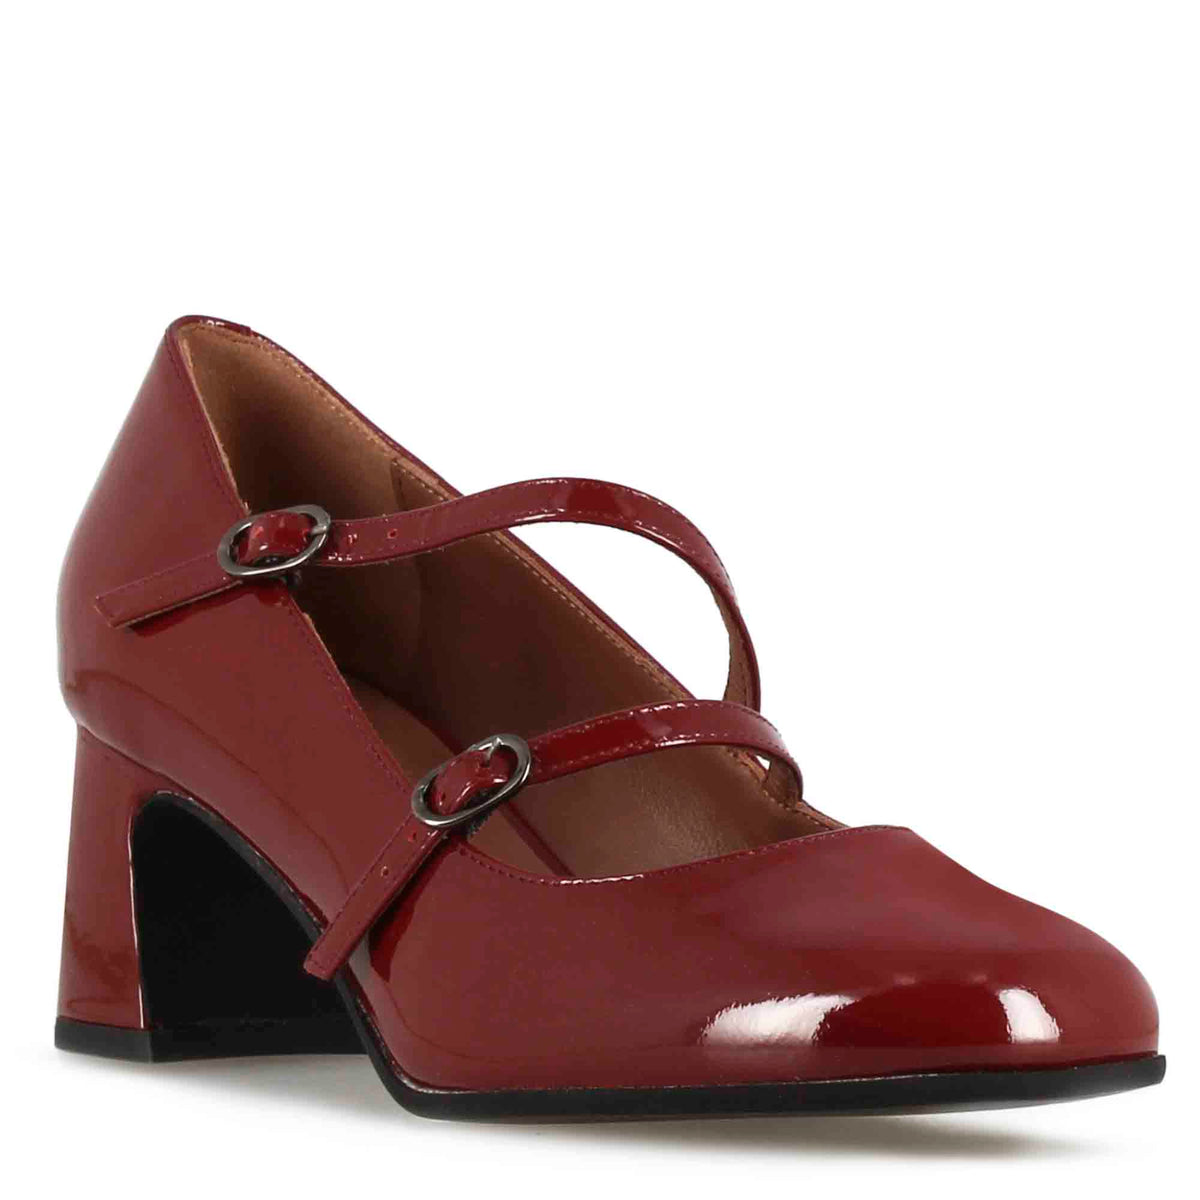 Mary Jane décolleté in burgundy patent leather with double strap